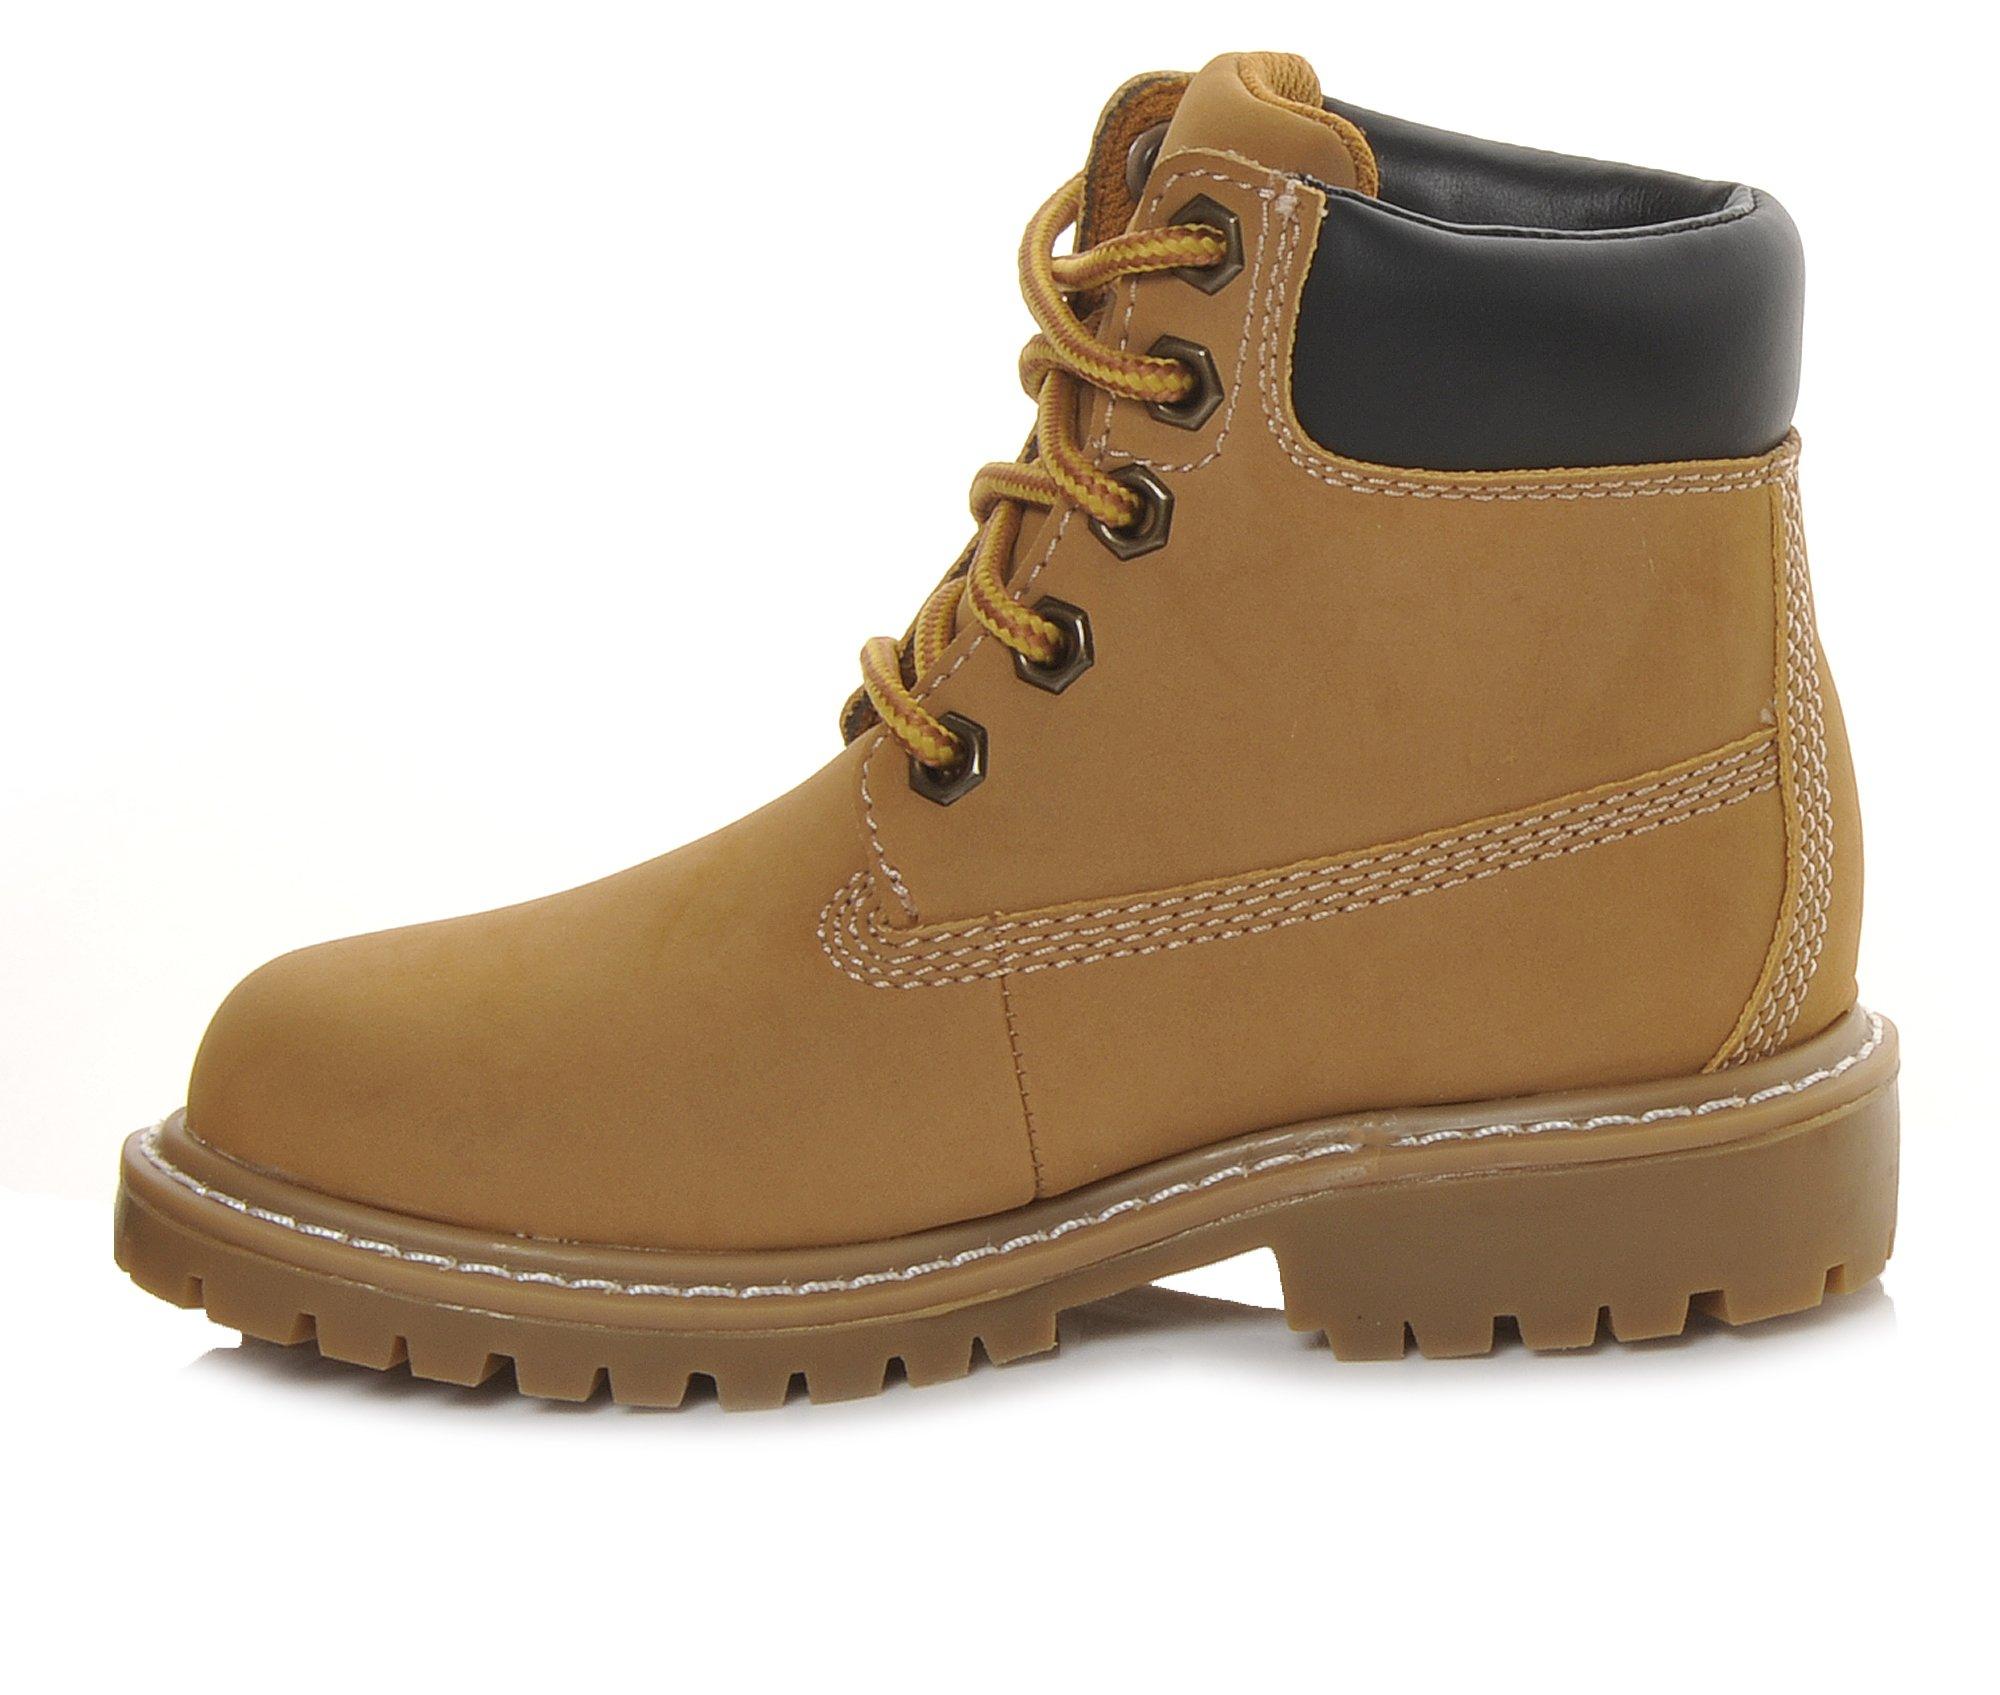 Boys' Stone Canyon Little Kid & Big Kid Worker Boots